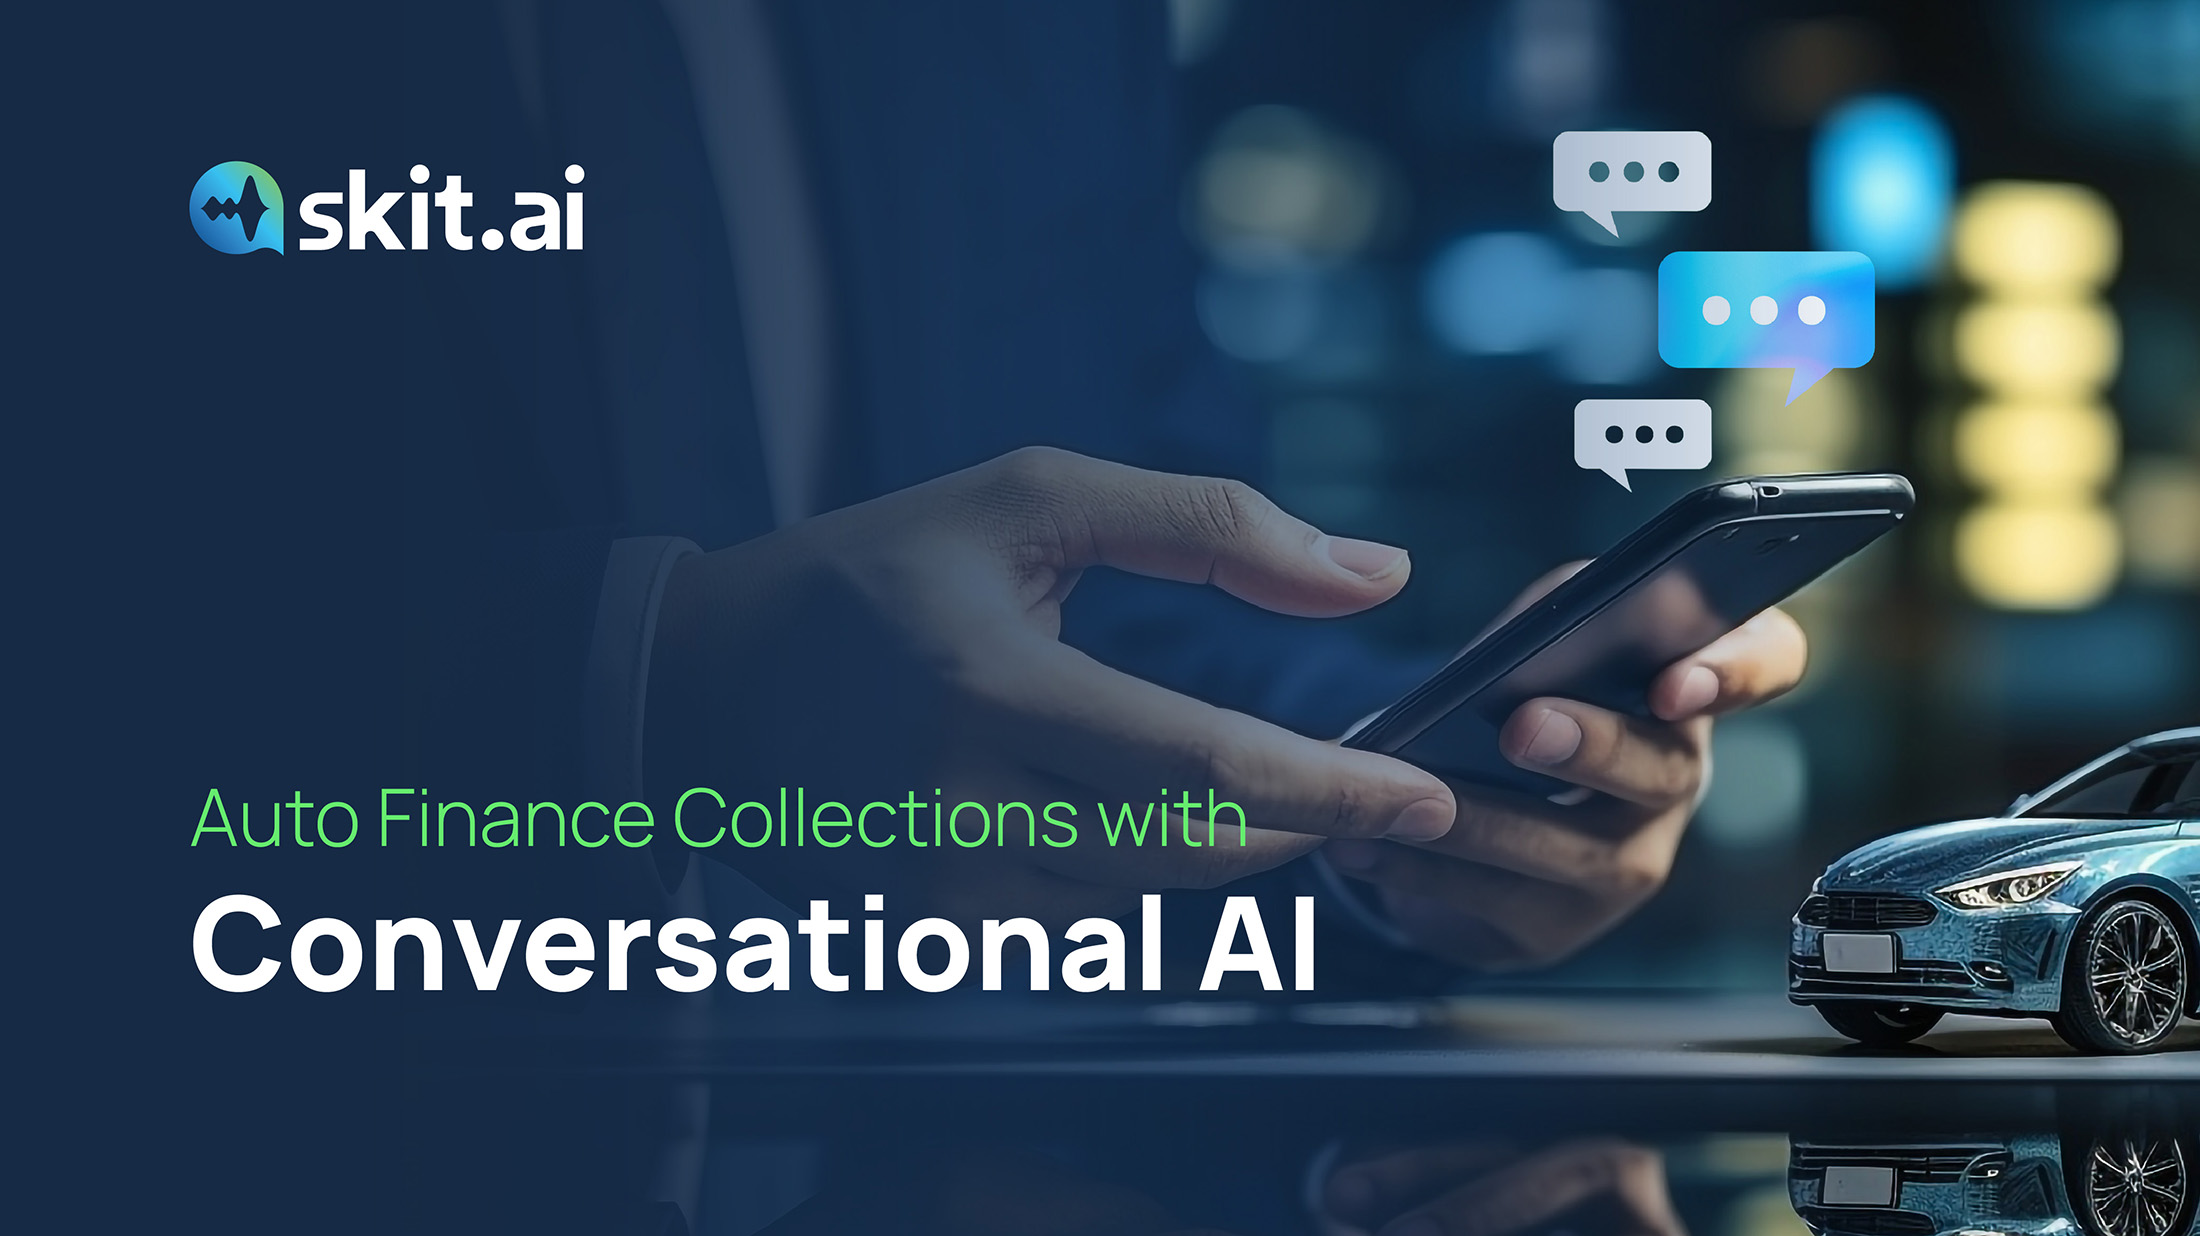 Automate Your Auto Finance Collections with AI-Powered Text Messaging